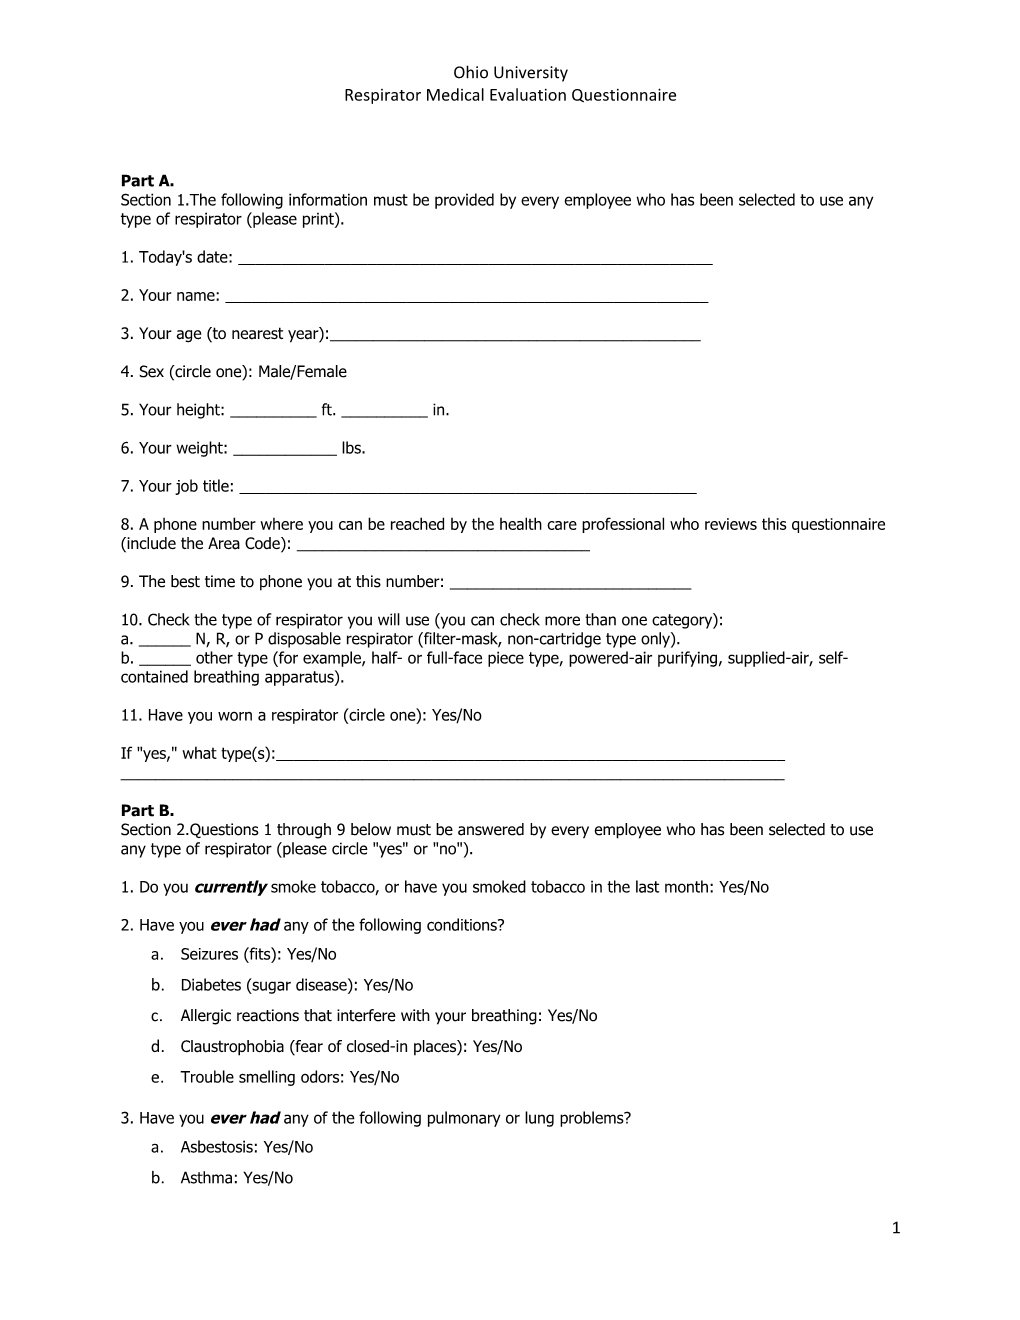 Respirator Medical Evaluation Questionnaire s1